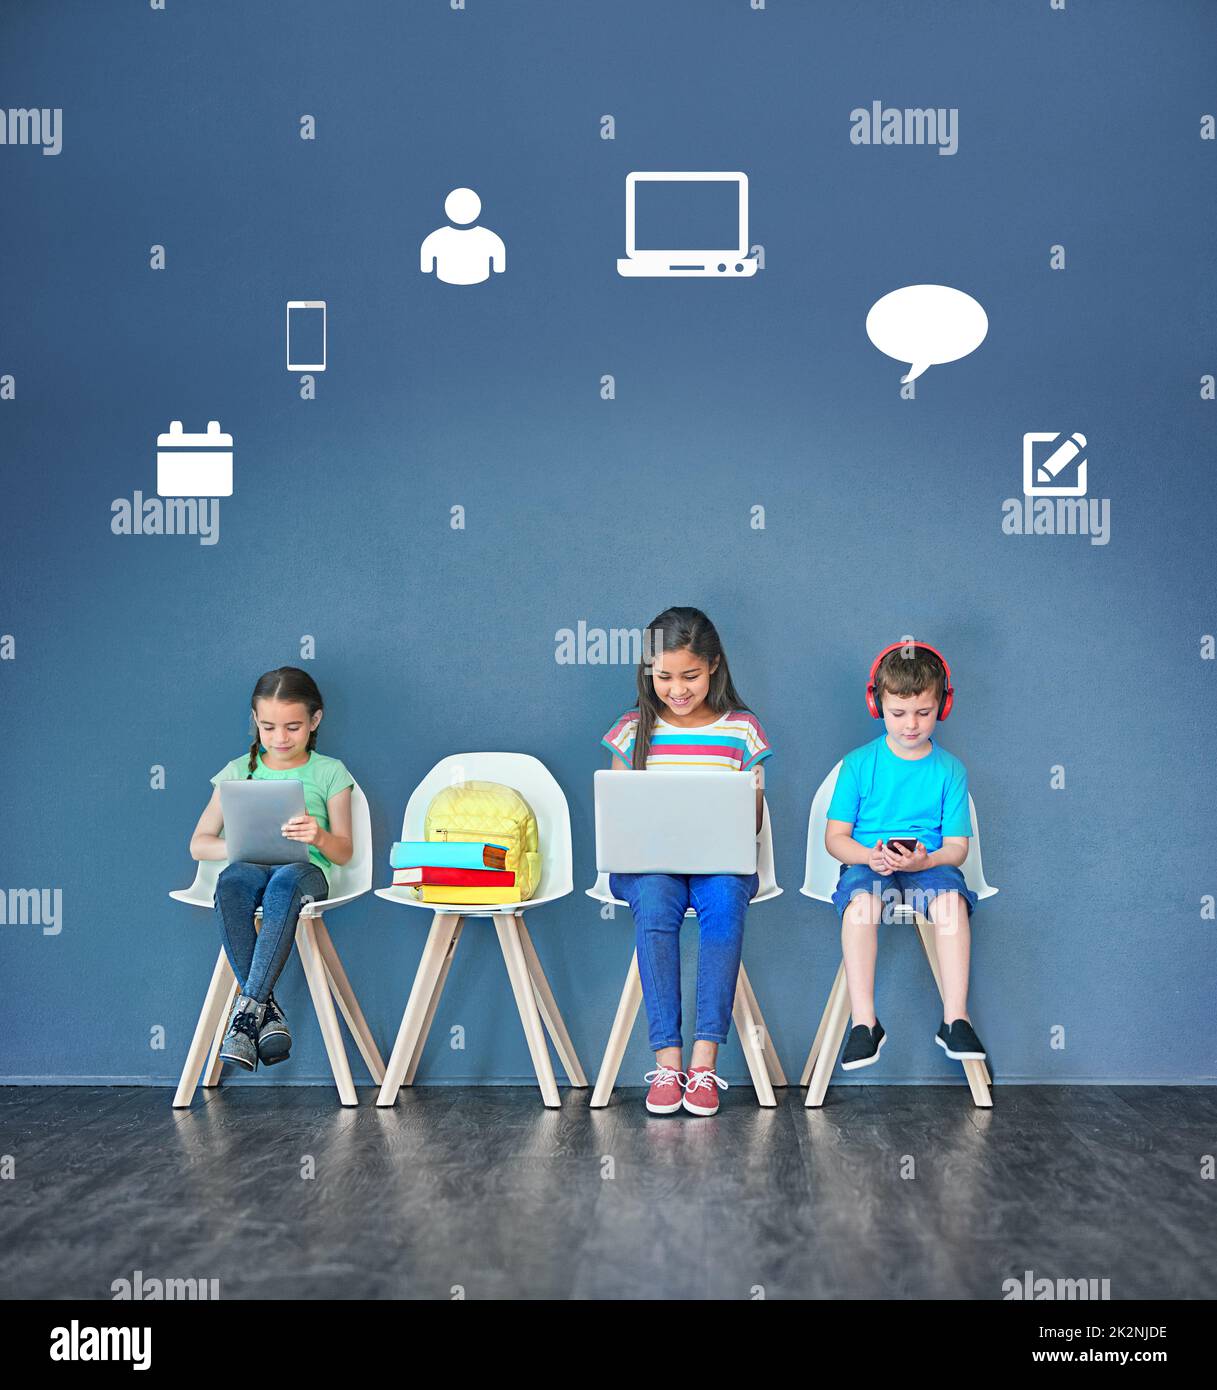 Todays child is more connected than ever before. Studio shot of kids sitting on chairs and using wireless technology with technological icons above them against a blue background. Stock Photo